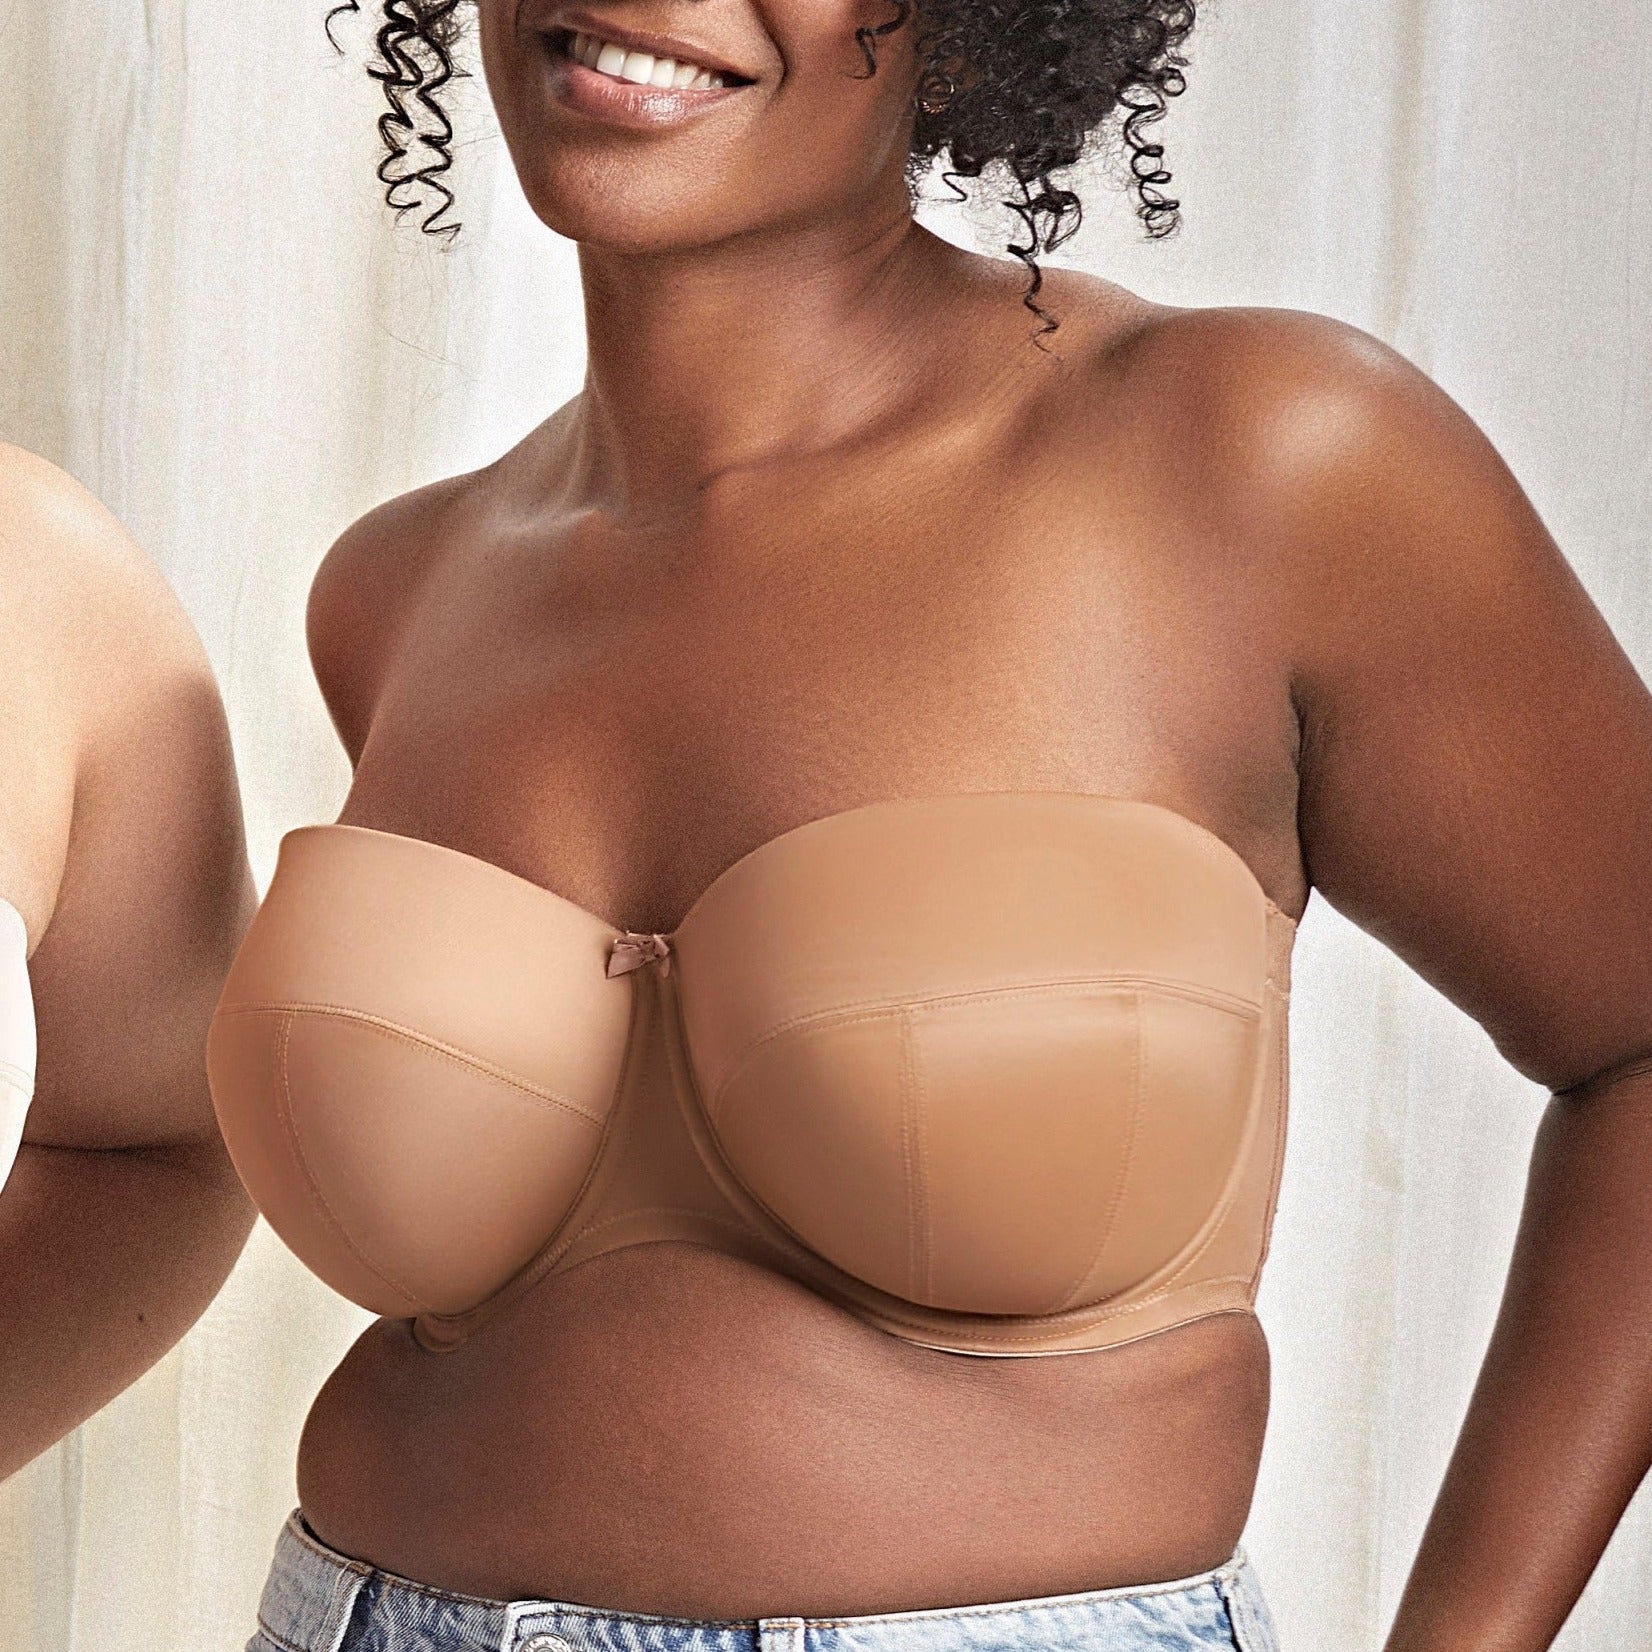 The Guide To Strapless Bras For A Large Bust - Chatelaine